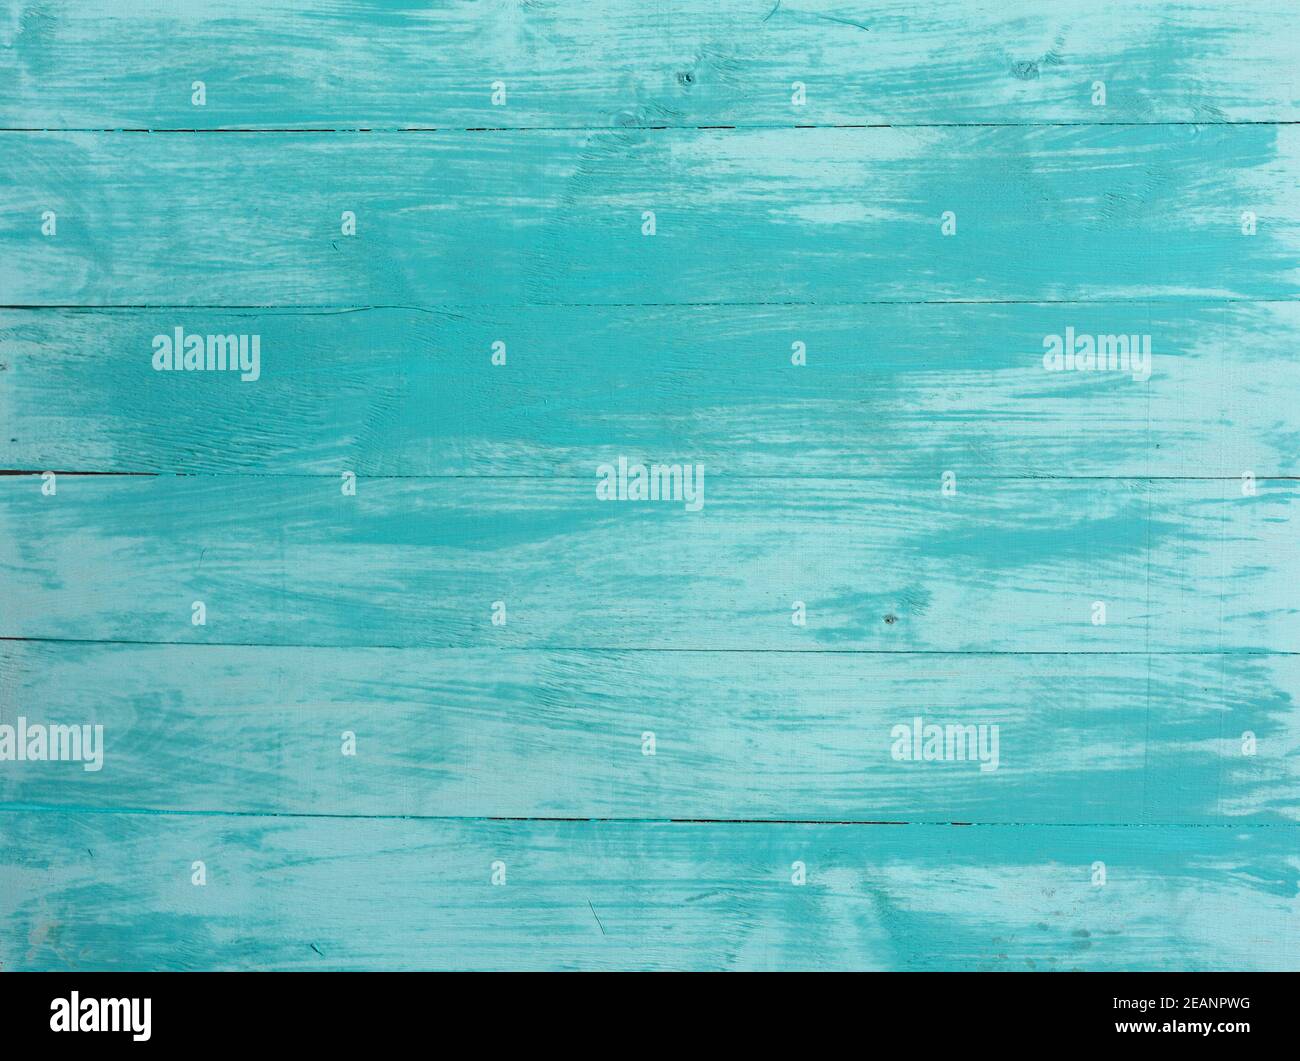 Old vintage turquoise bright color with vertical boards. Grunge wooden background. Stylish shabby background with place for text in prince style. Stock Photo